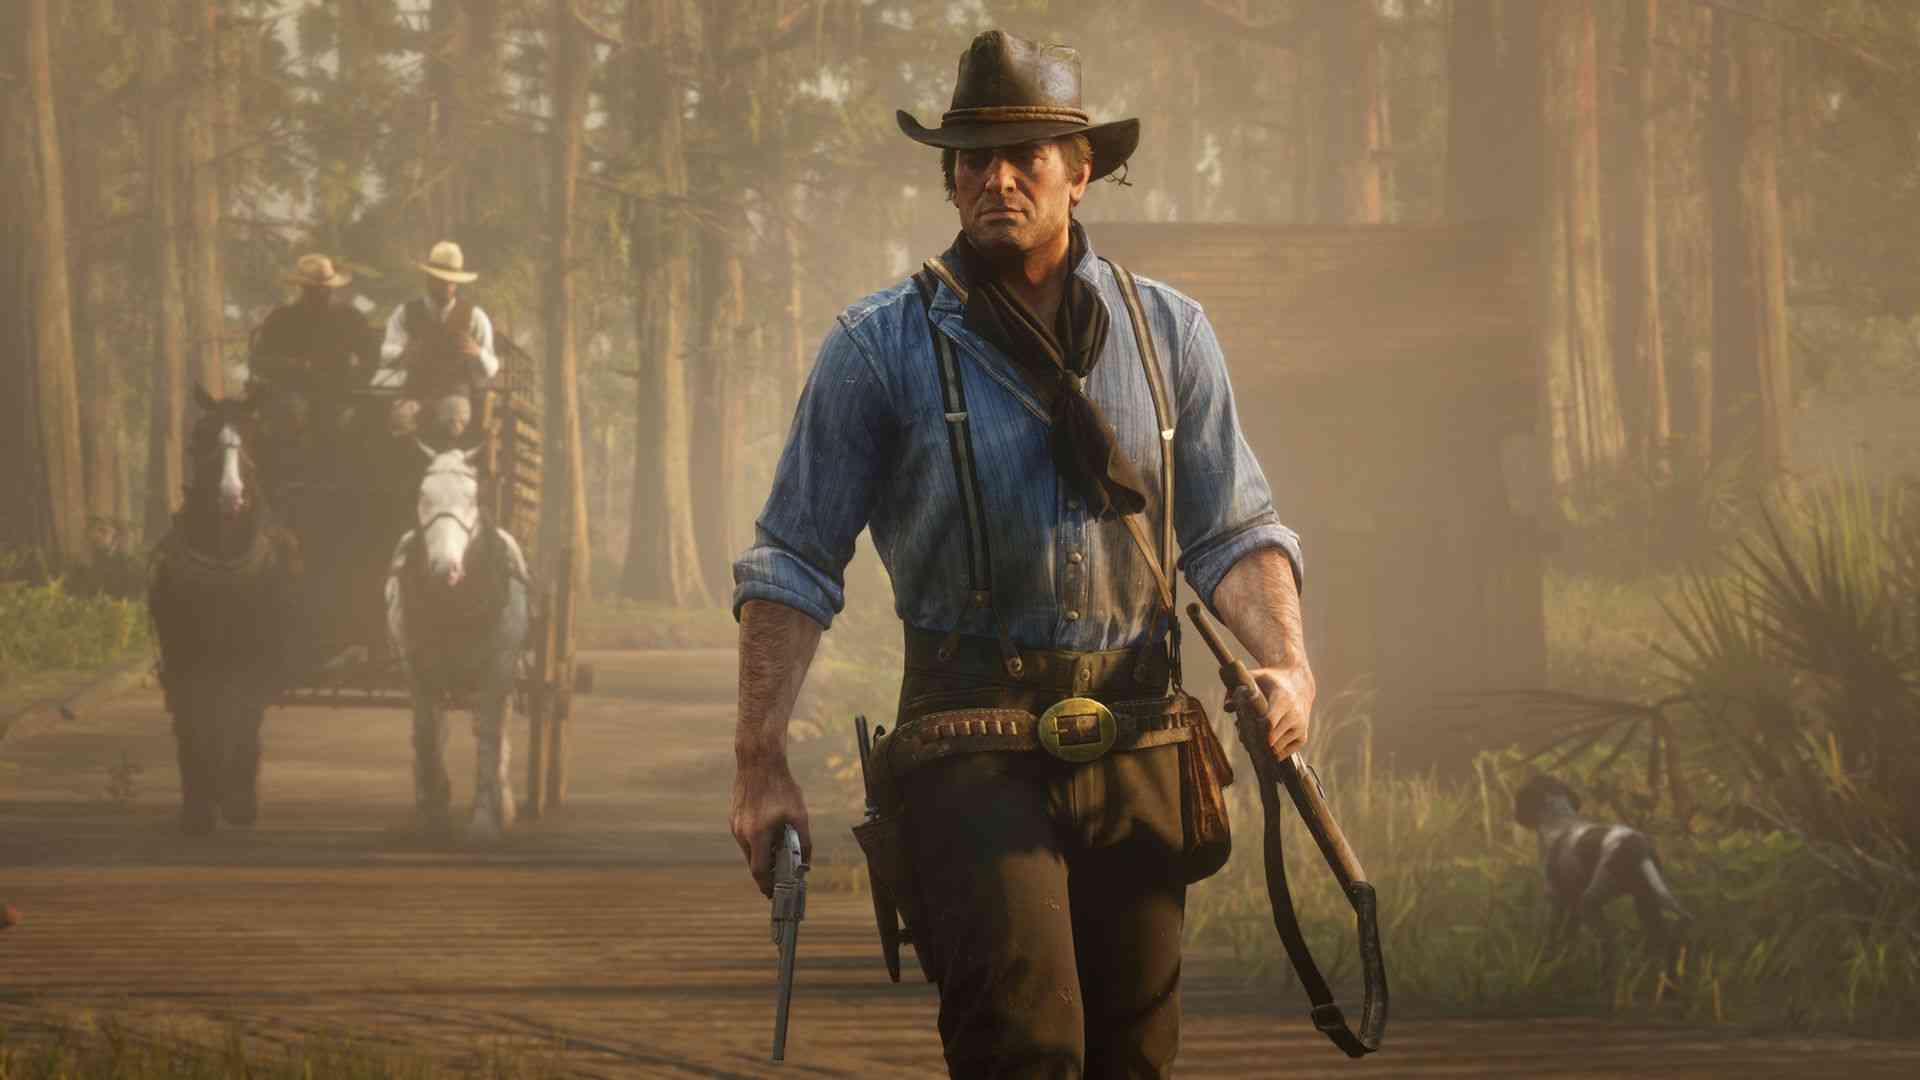 red dead redemption 2 become best selling game again this week 1016 big 1